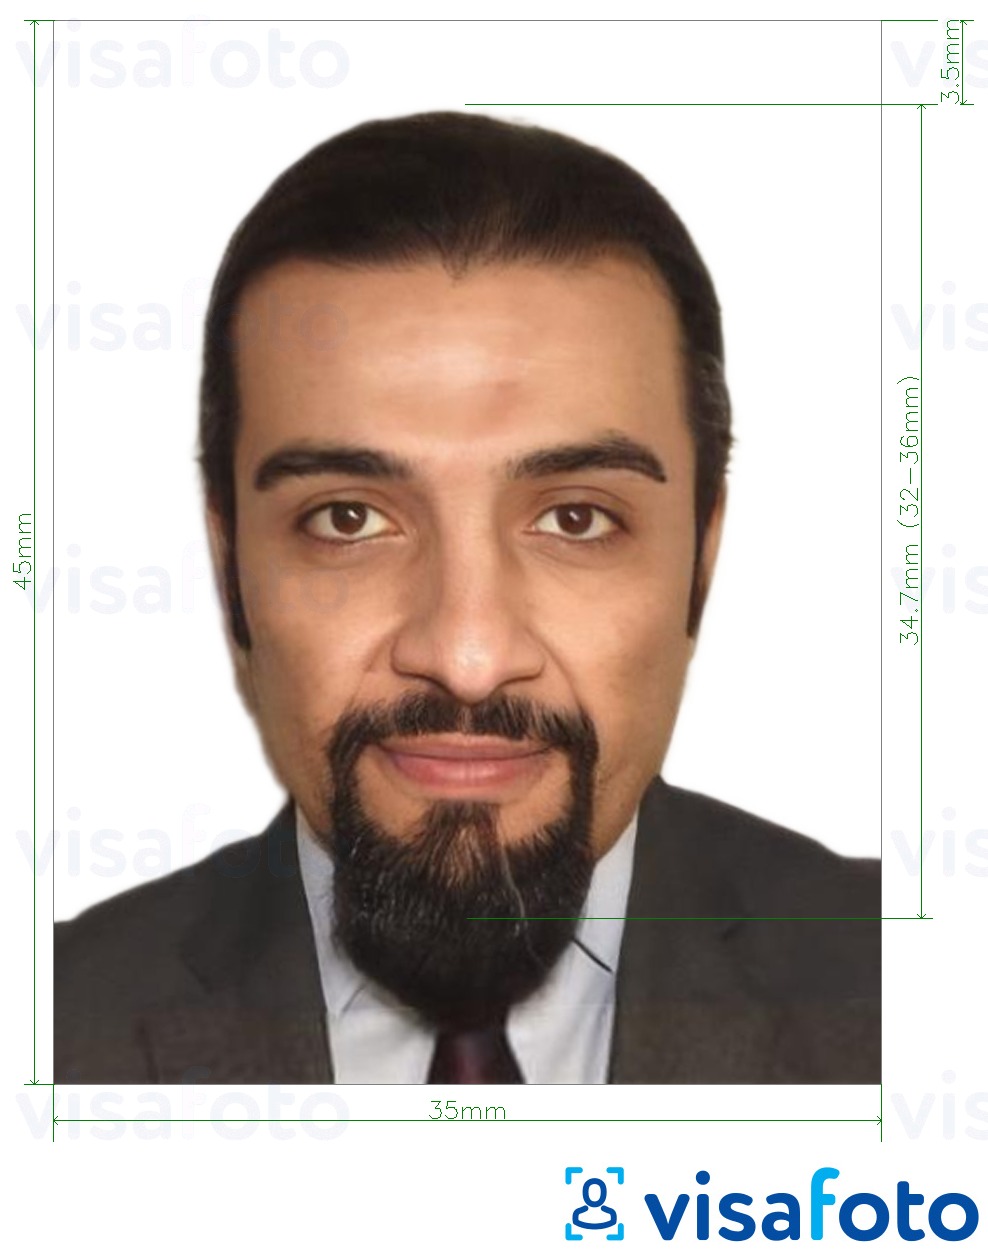 Example of photo for Algeria passport 35x45 mm (3.5x4.5 cm) with exact size specification